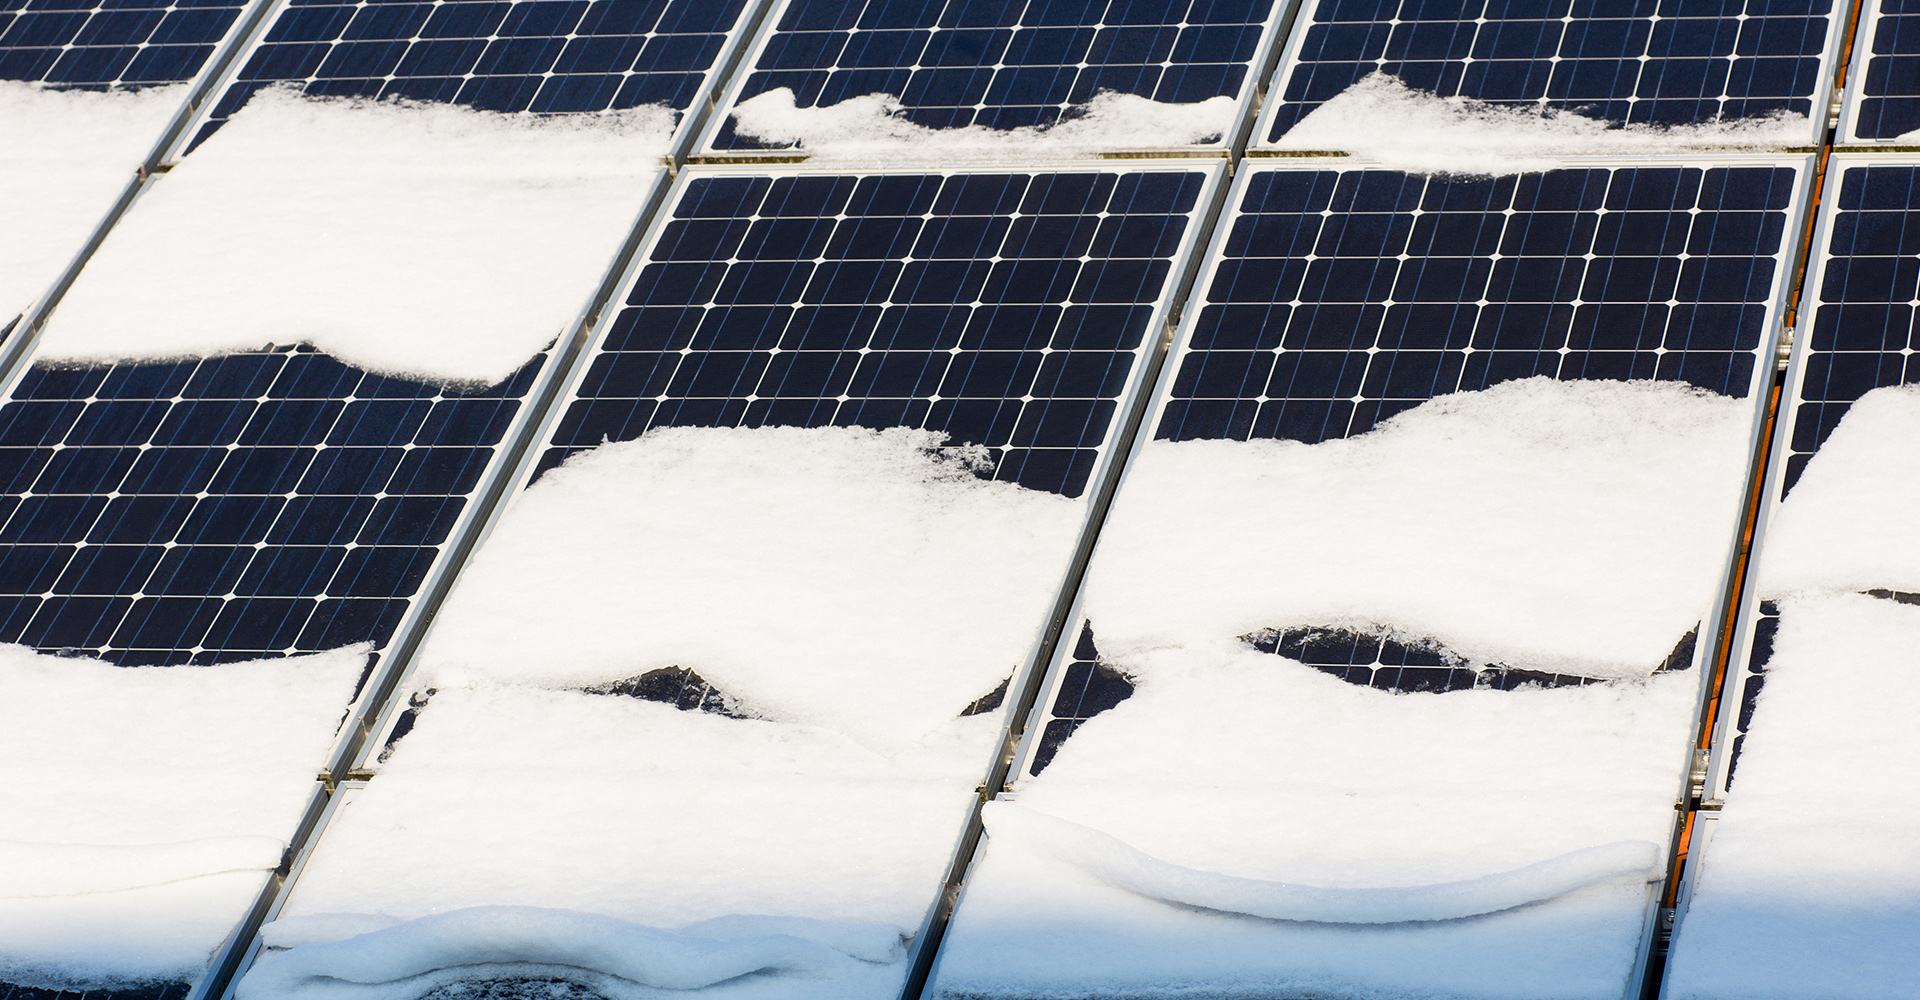 A Close-up view of an array of solar panels with snow sitting on top.